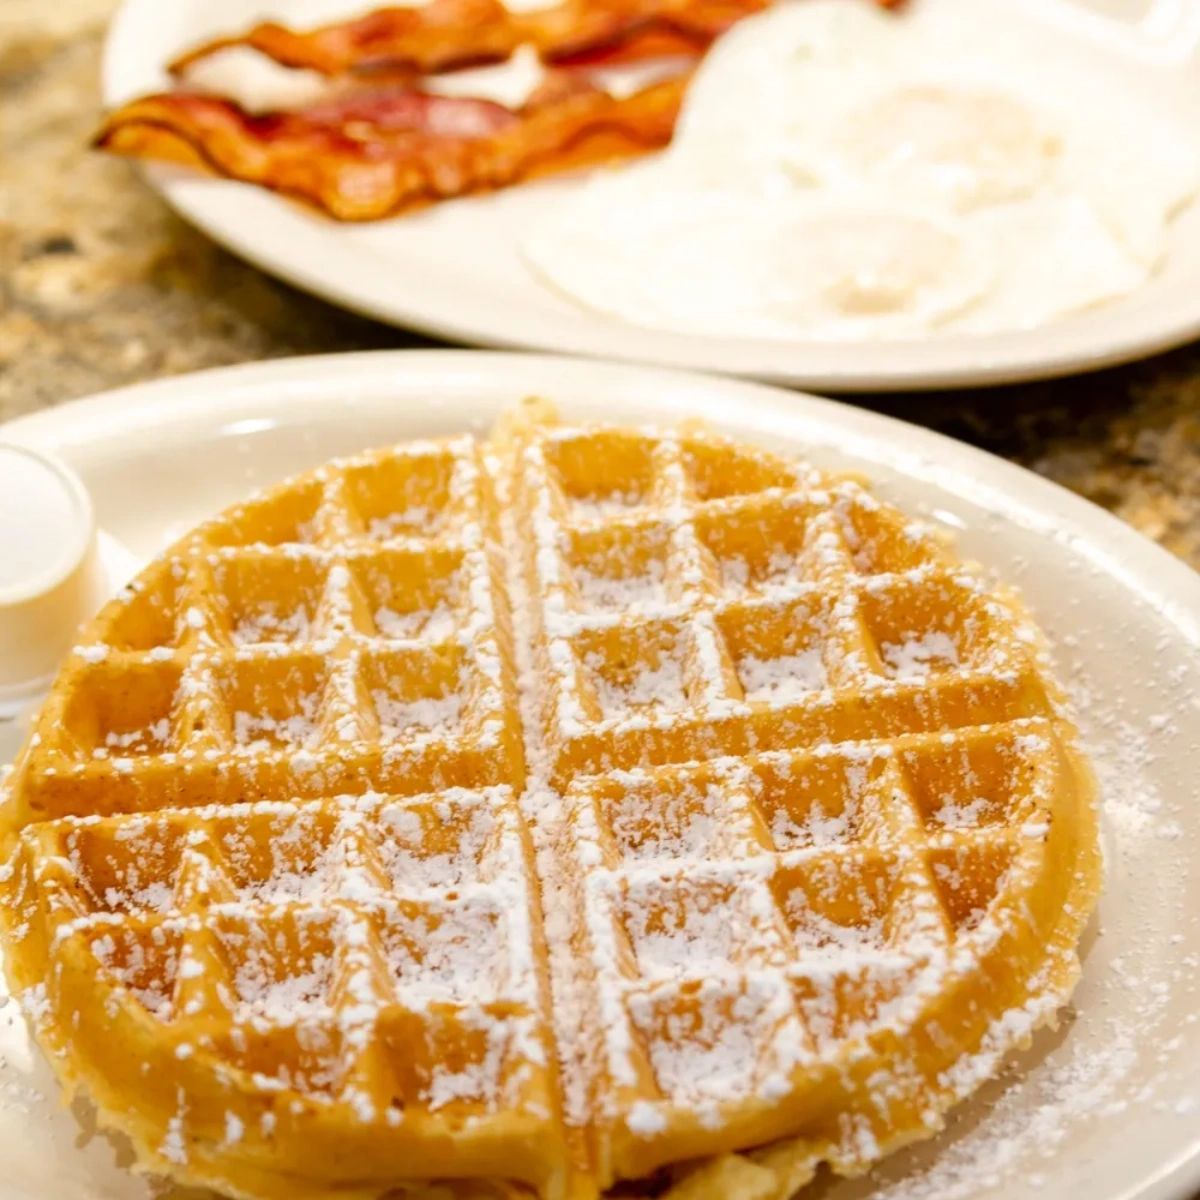 Start your day off right with our mouthwatering homemade breakfast dishes! From fluffy pancakes to sizzling bacon, we've got all your favorites covered. And the best part? We serve breakfast all day long! #BreakfastLovers #HomeStyleCooking #BrooksideDiner